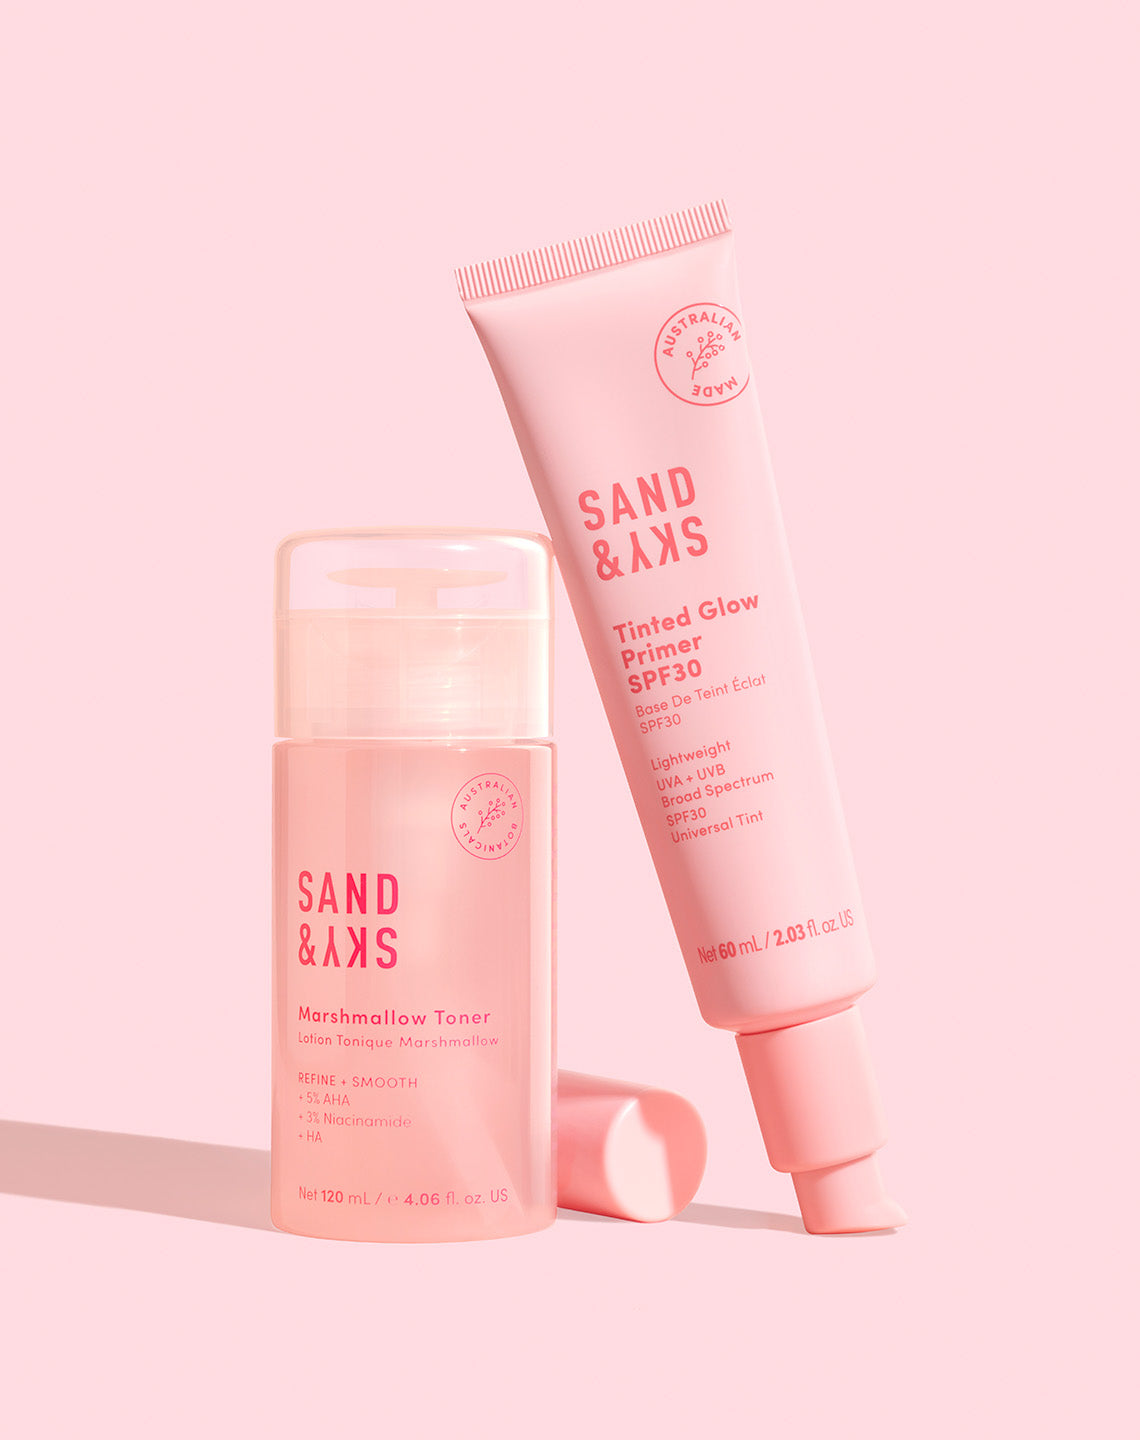 Sand & Sky - Calling all the glow-lovers out there! Want that instant glow?  📢 Use Enzyme Powder Polish 2-3 times a week to reveal your inner radiance.  Want to glow even